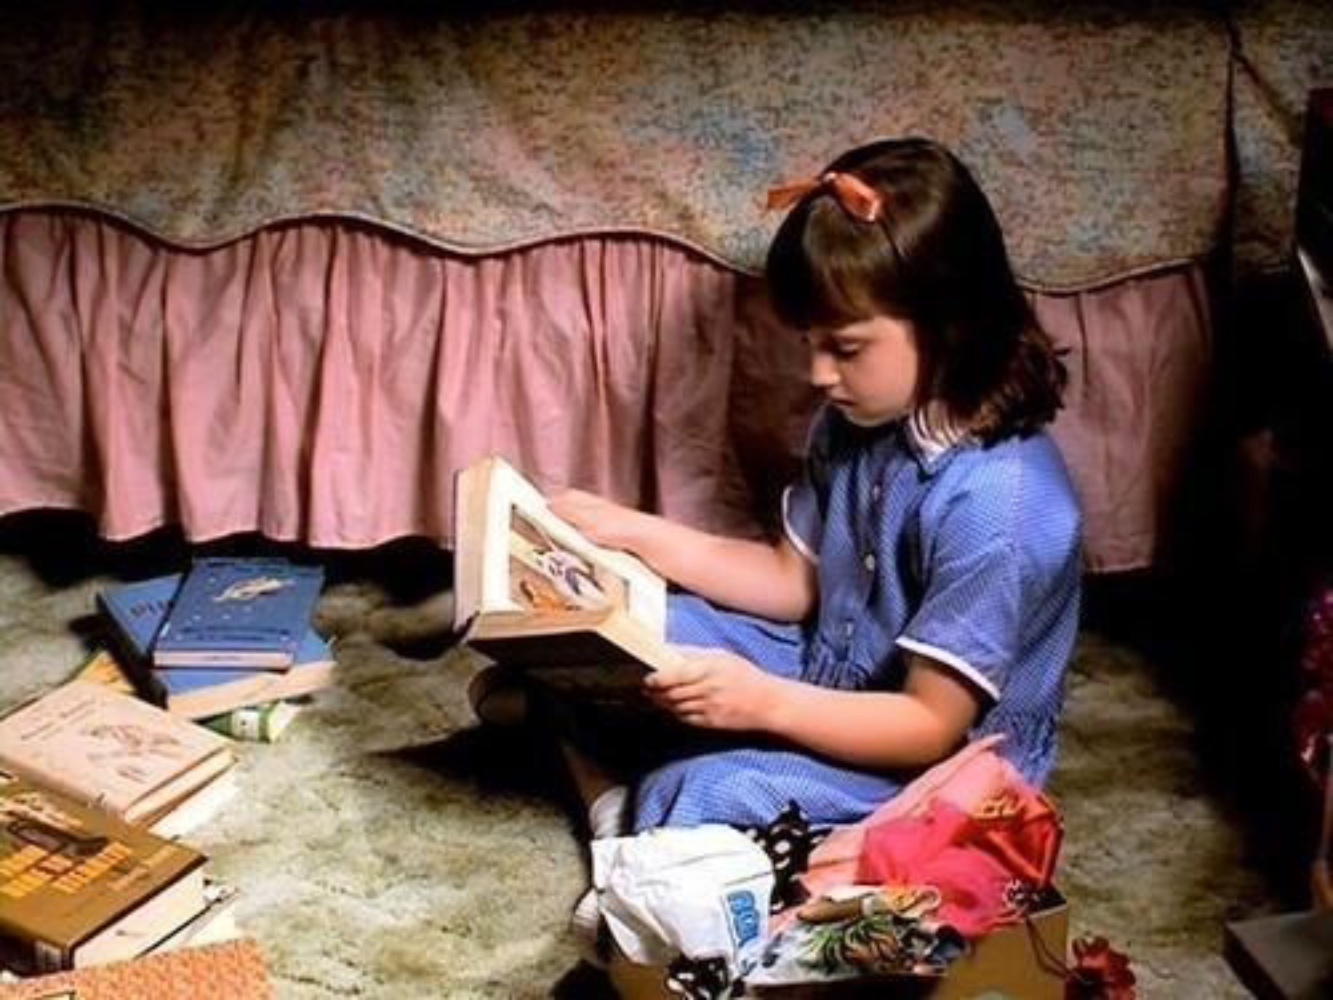 A still from the film of the young protagonist reading literary classic after classic on her bedroom floor.